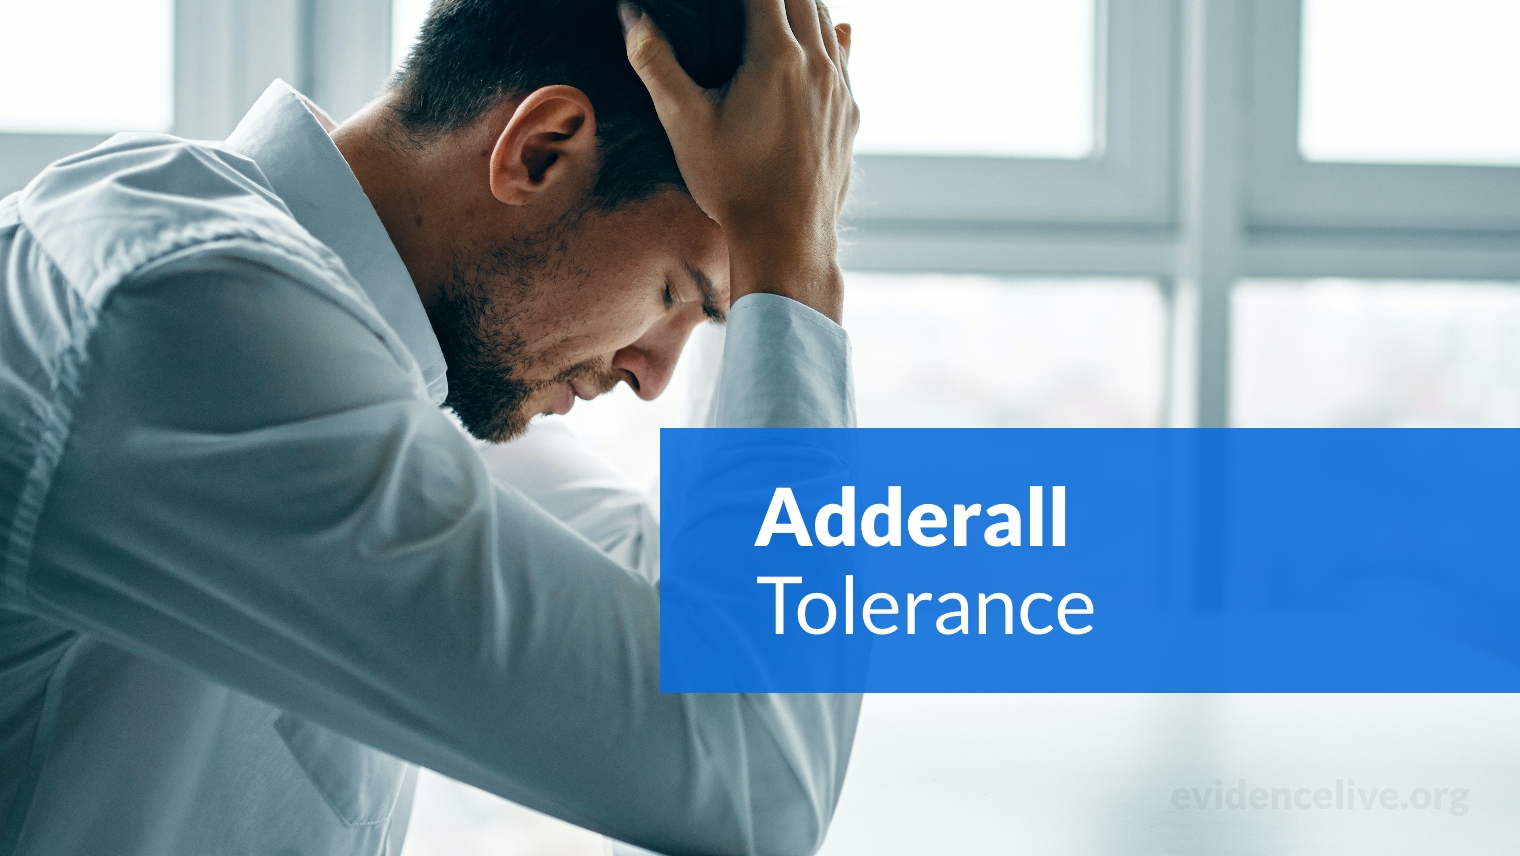 How Fast Does Adderall Tolerance Build Up? Can You Reset It?